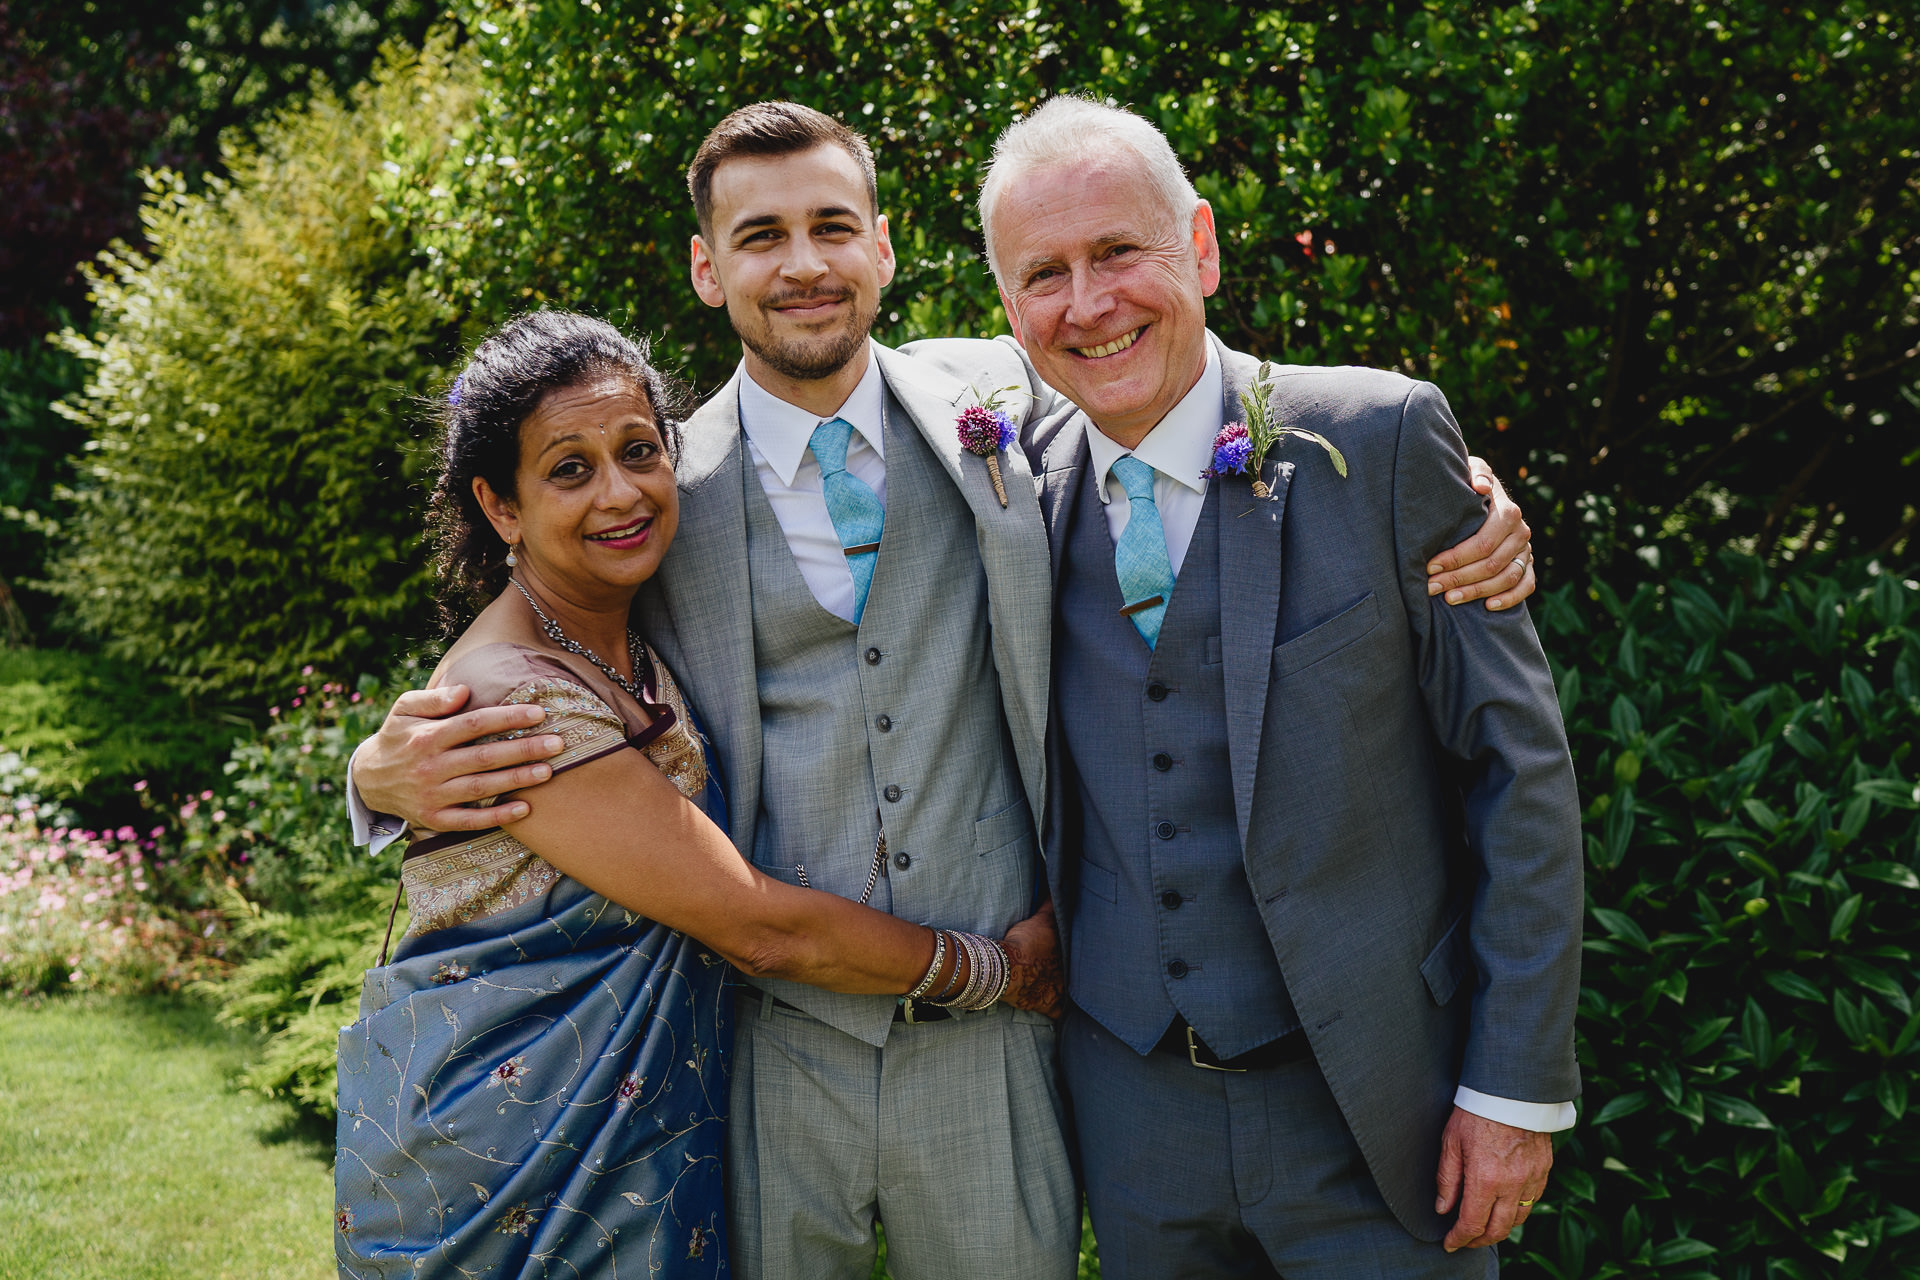 Groom with his mother and father